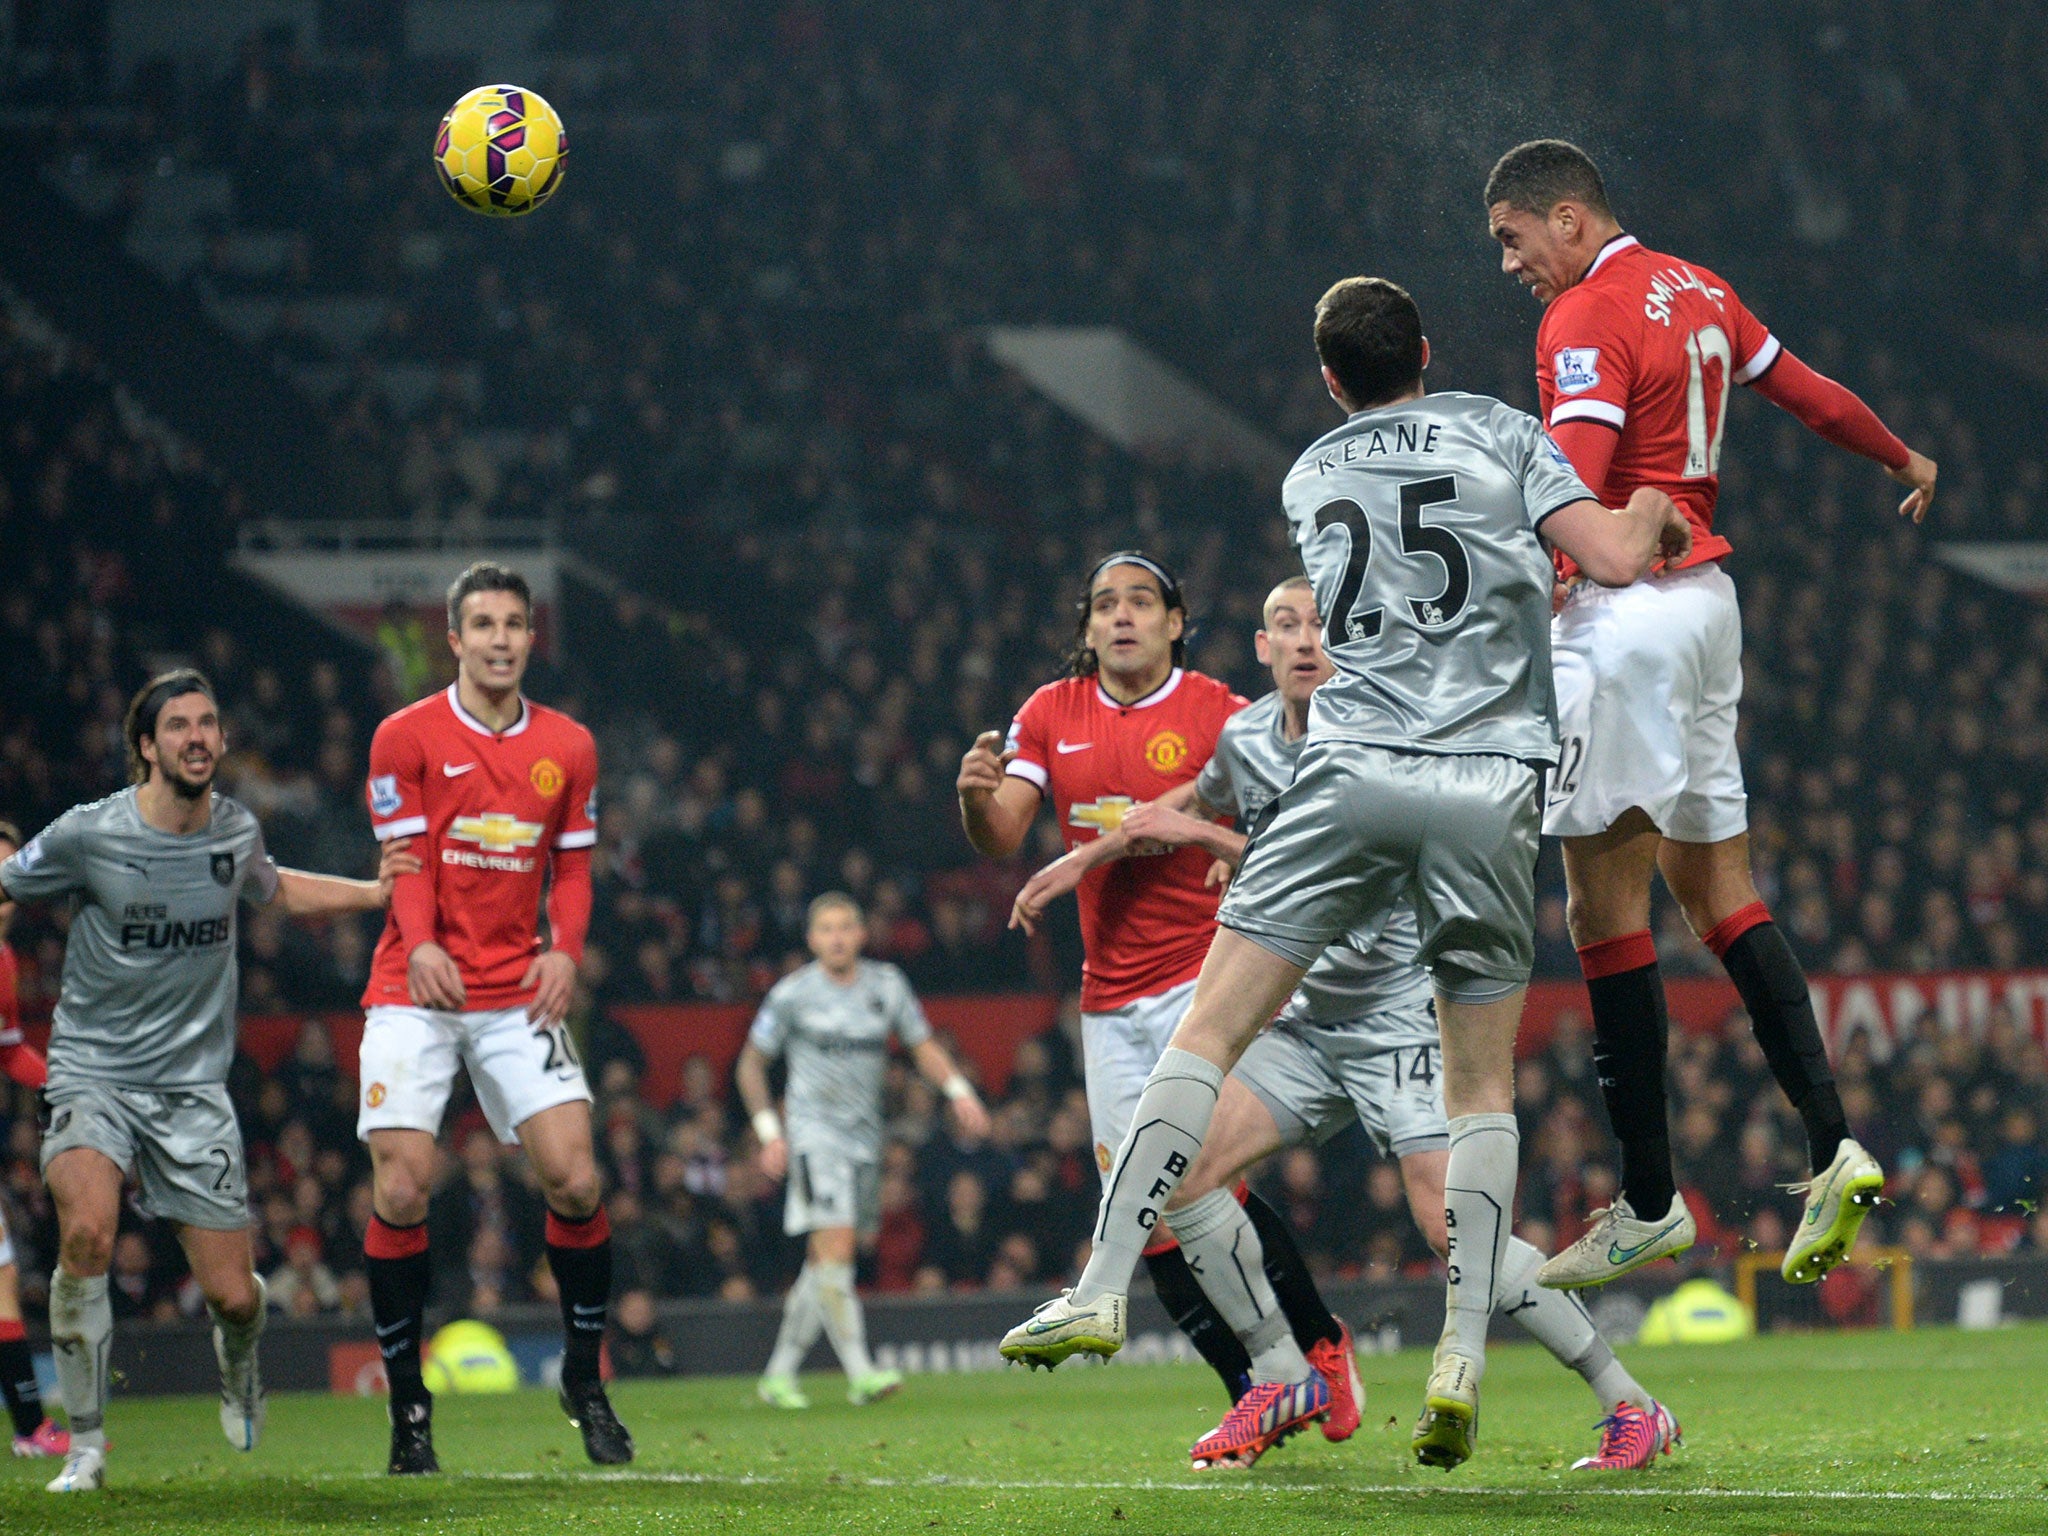 Chris Smalling heads in his second goal of the game